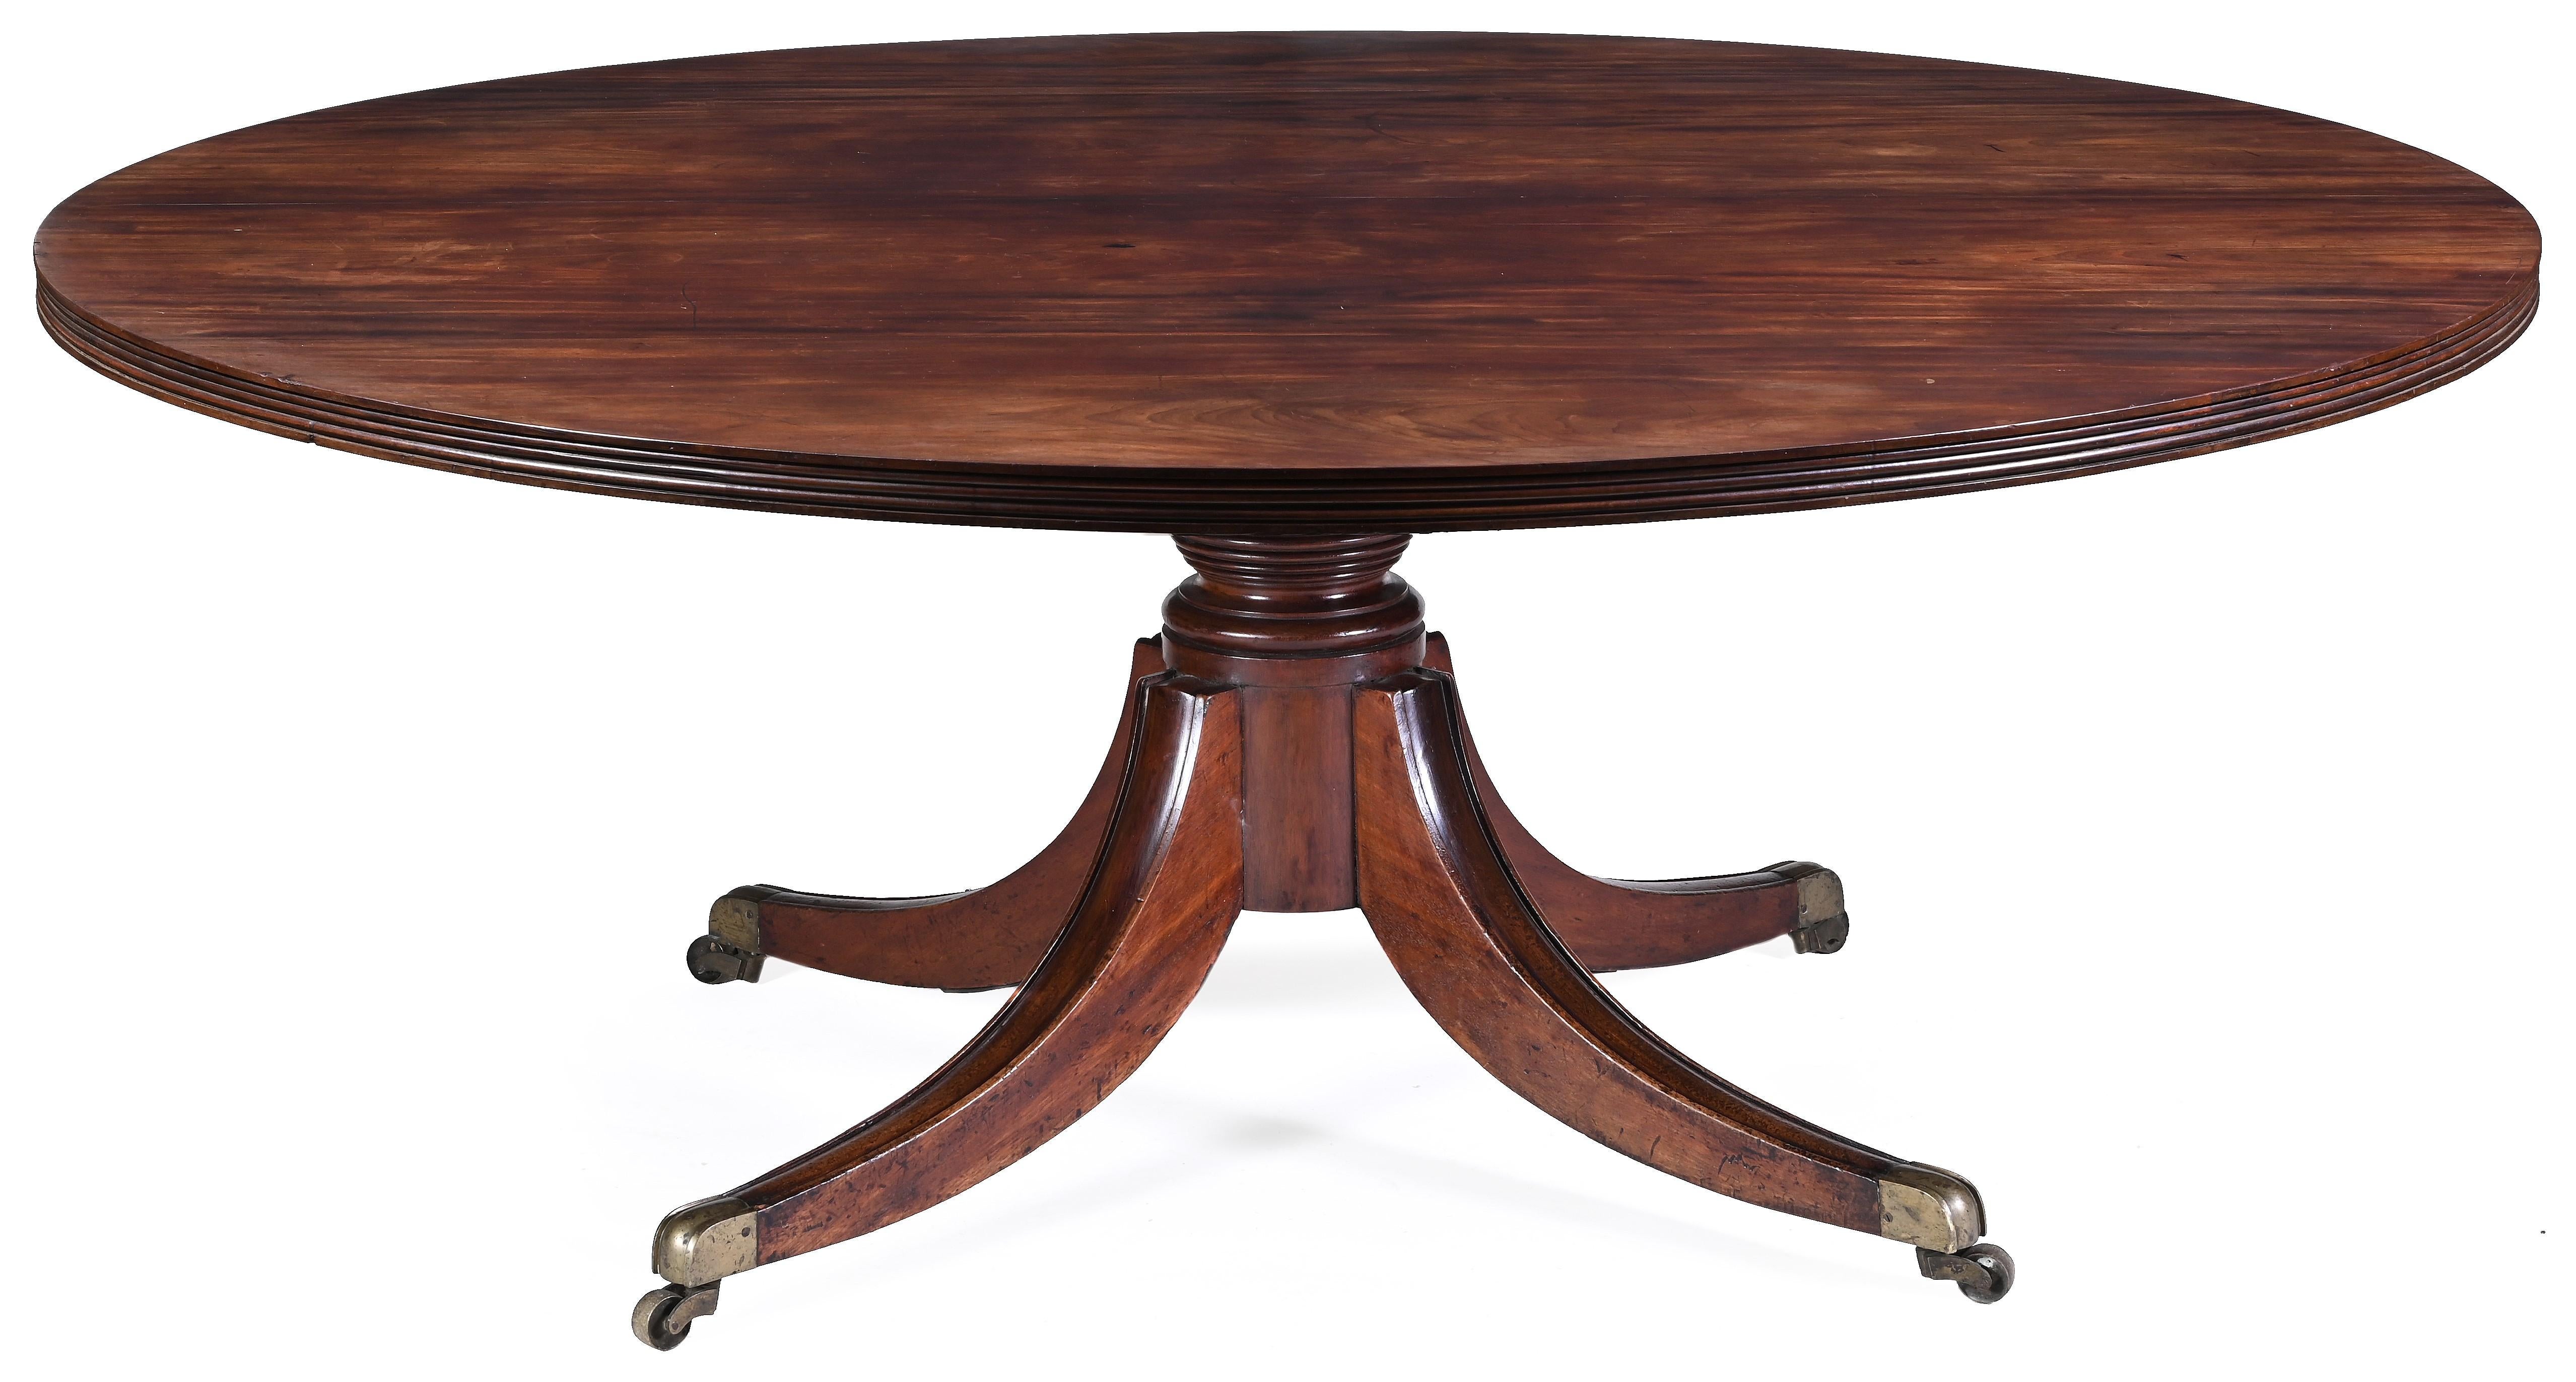 A large Irish Regency mahogany dining table, the well figured mahogany circular top with a double reeded edge, resting on a large turned pillar with four splay reeded sabre legs, terminating in brass lions paw casters. Stamped 3072.

By Mack